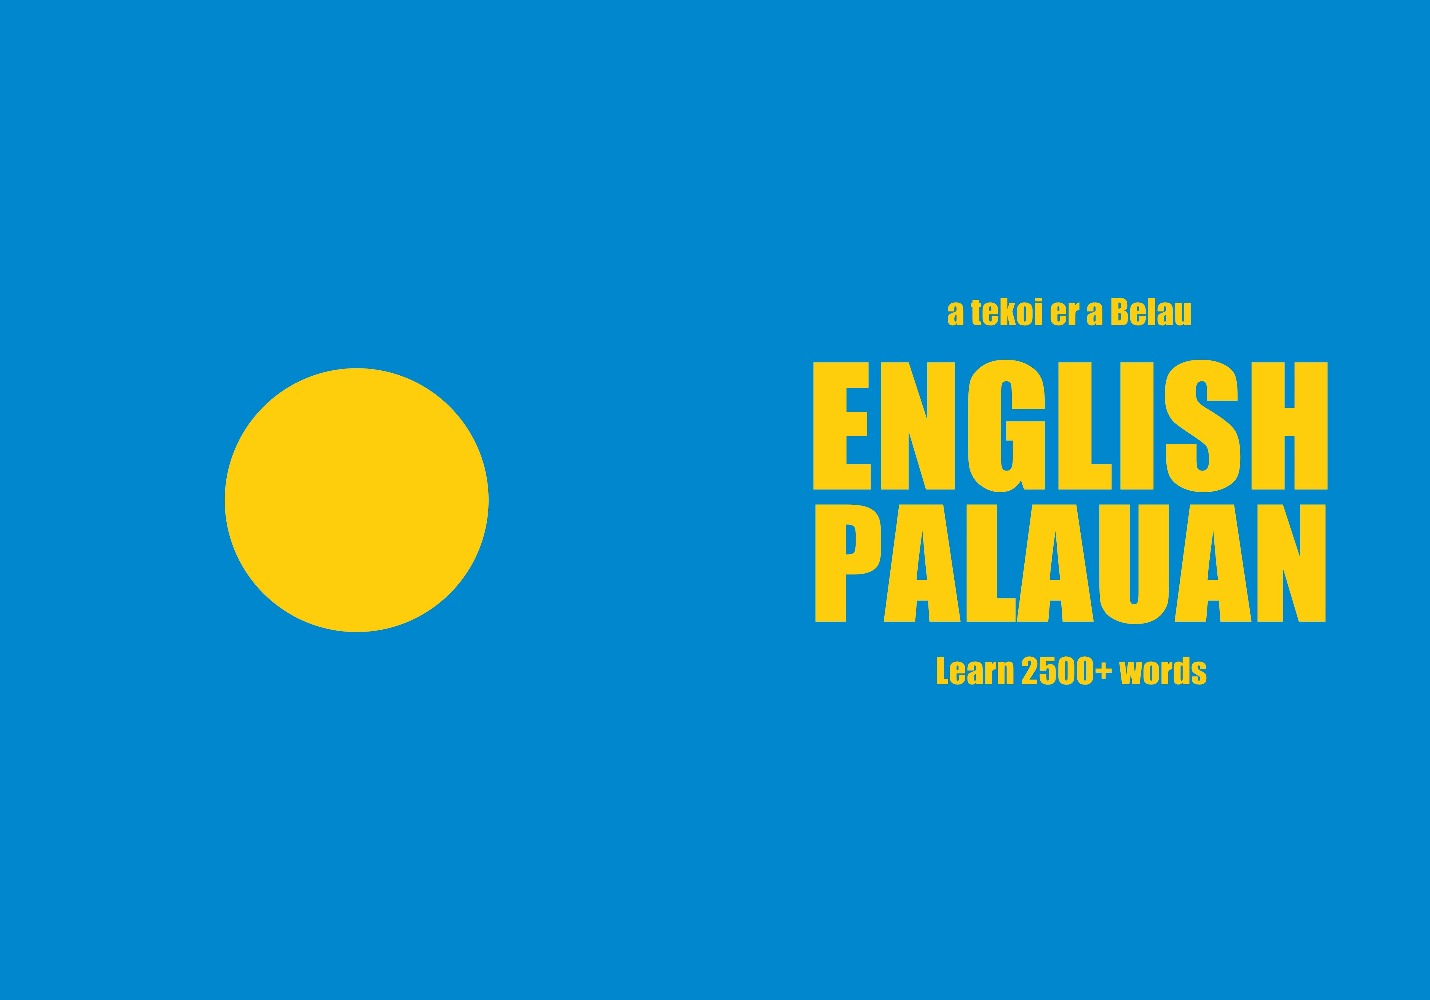 Palauan language learning notebook cover